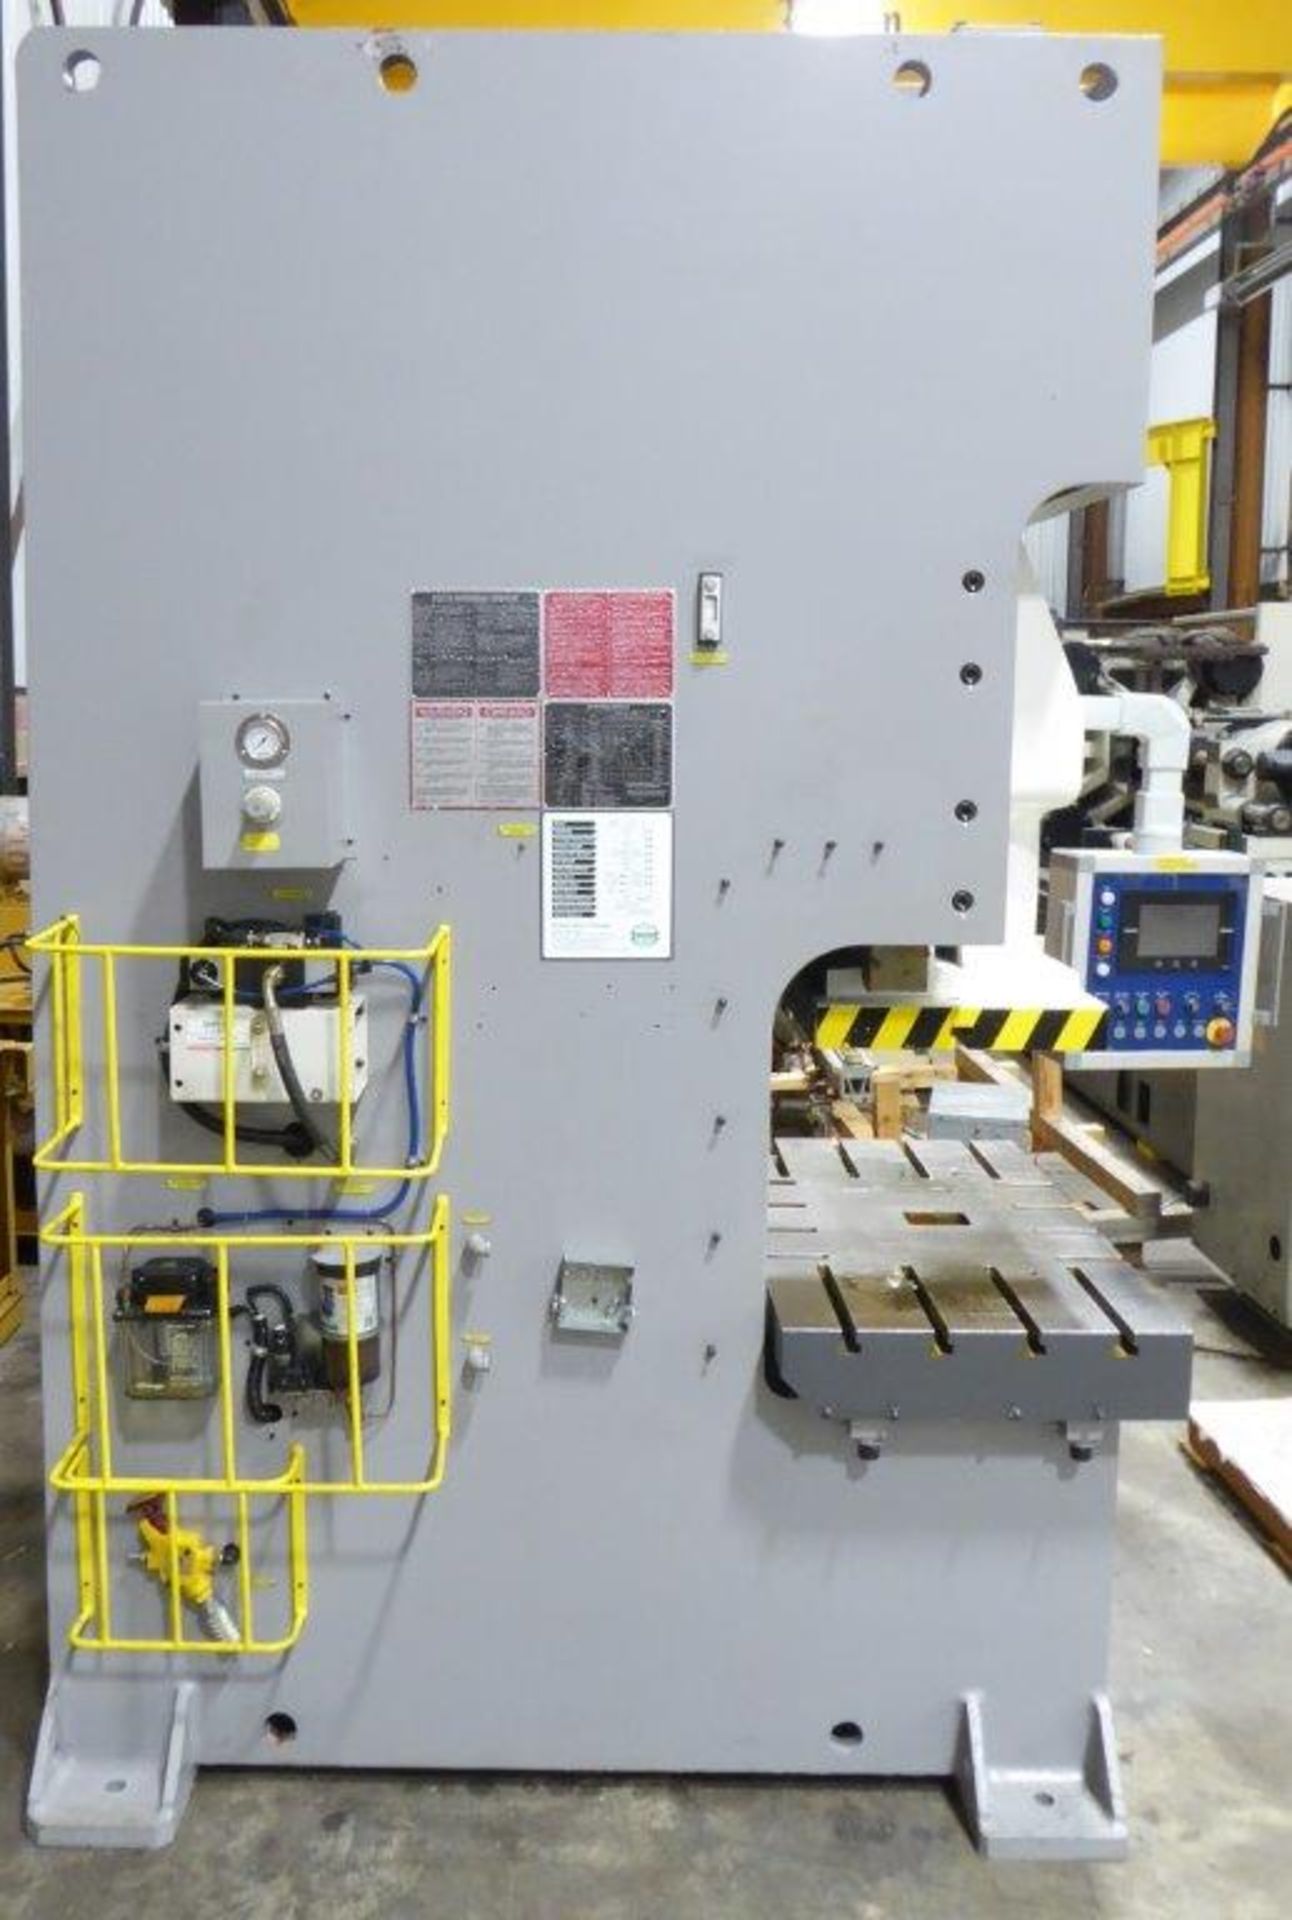 Sutherland Model KC1-121-1 Gap Frame Press, s/n 201908002, New 2019, Never Placed Into Production - Image 5 of 18